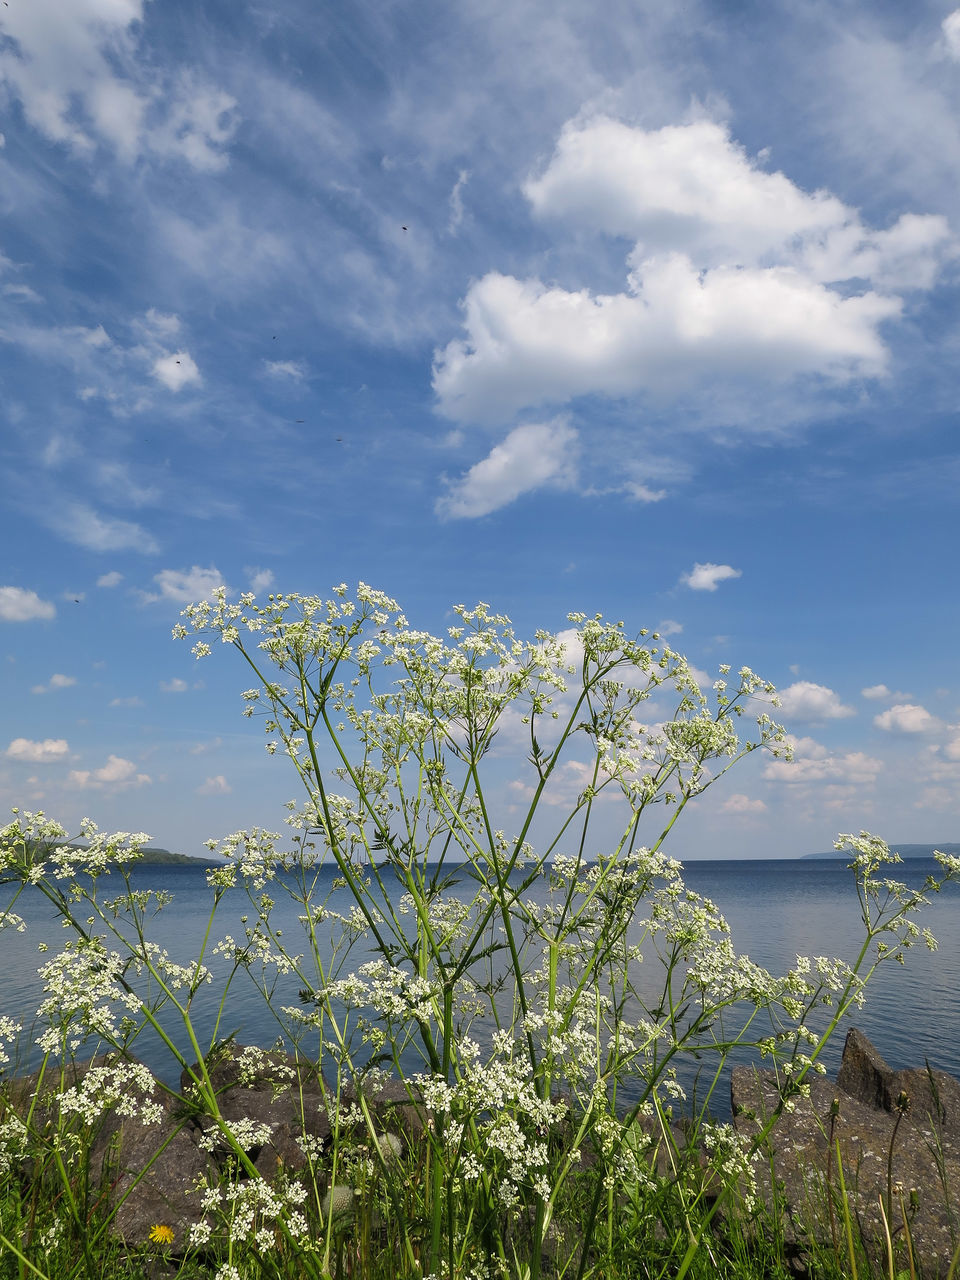 flower, sky, beauty in nature, water, growth, plant, tranquil scene, nature, tranquility, sea, scenics, freshness, cloud - sky, stem, fragility, cloud, horizon over water, growing, day, no people